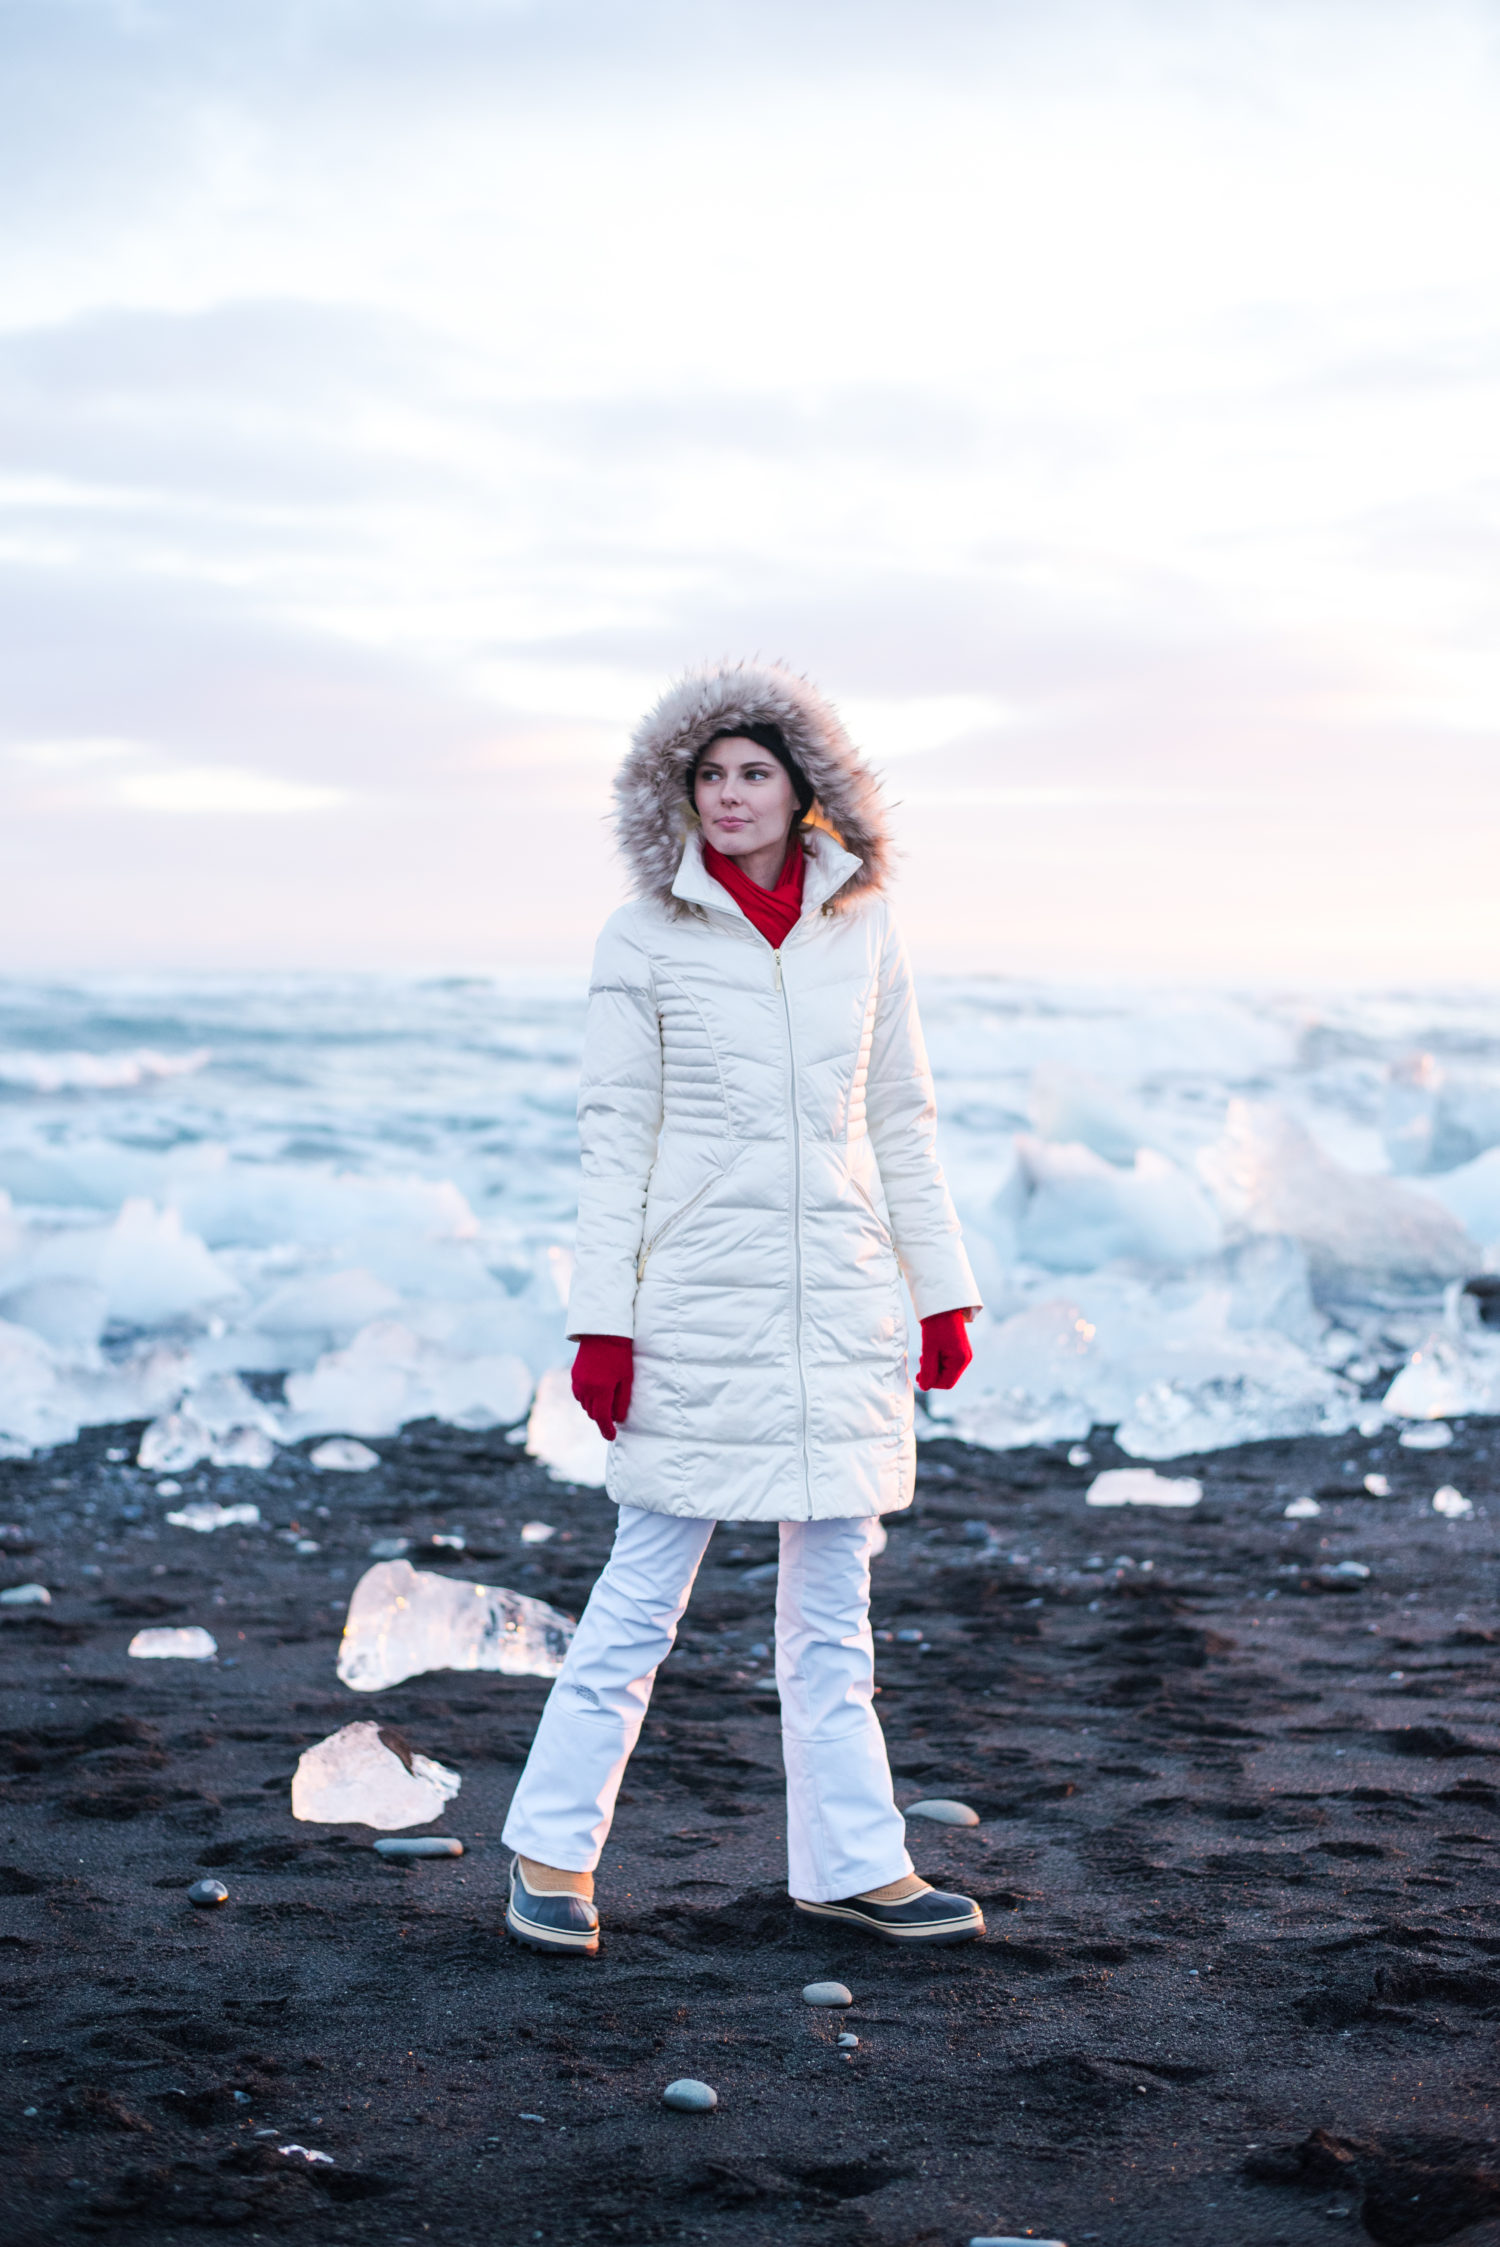 Miss USA 2011 Alyssa Campanella of The A List blog wearing Ellen Tracy faux fur coat and Sorel Caribou boots and North Face APEX snow pants in Jökullsárlón, Iceland